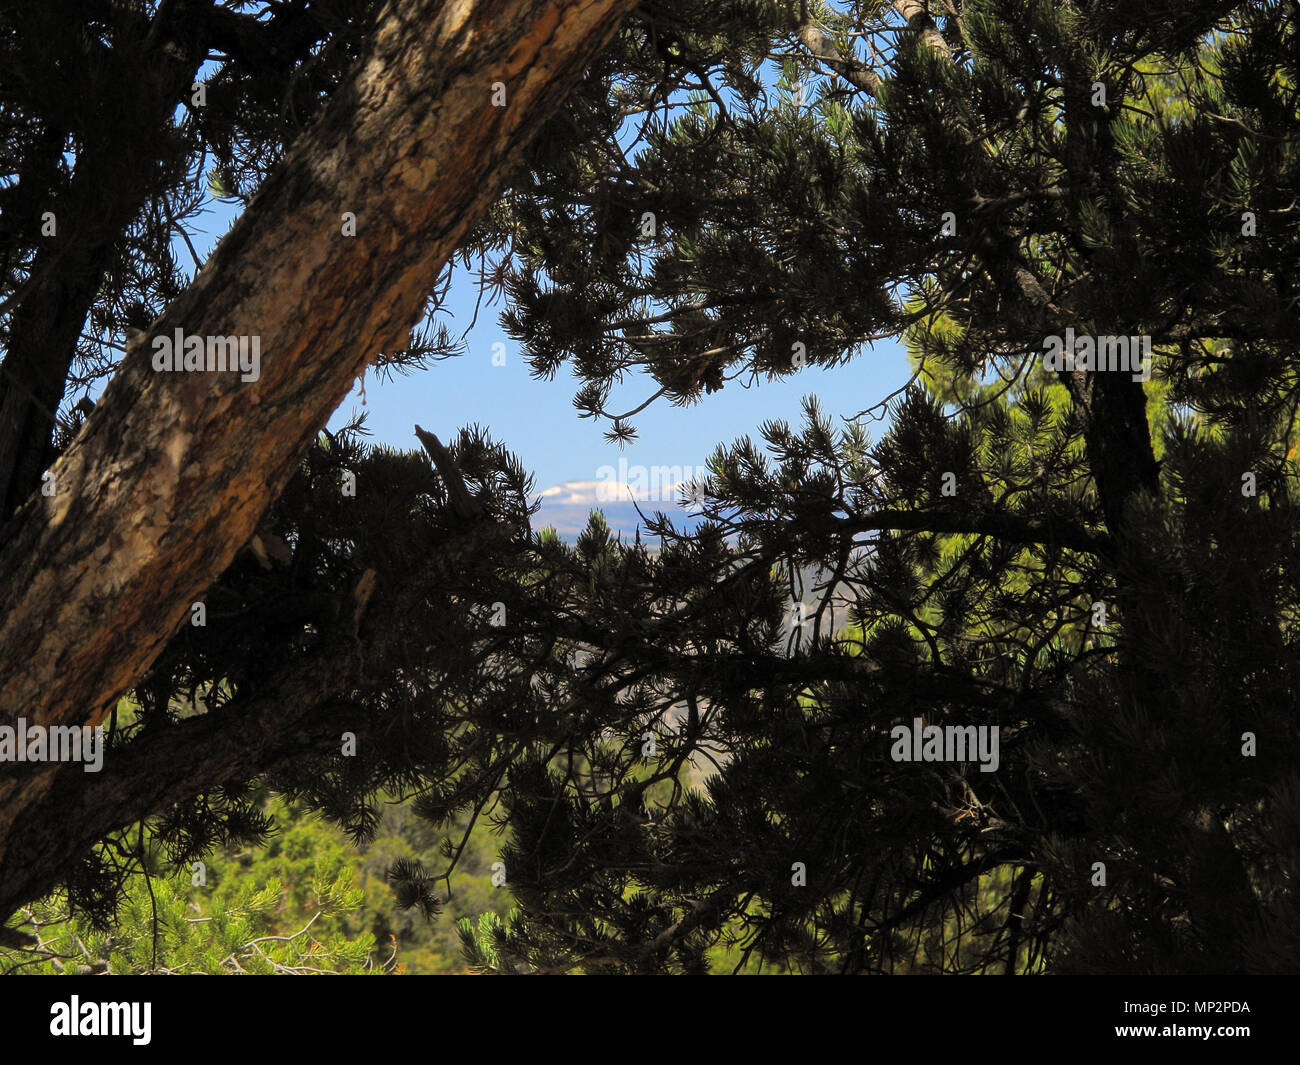 Ponderosa Pine Tree Branches with Snow Topped Mountain Range in Background Stock Photo